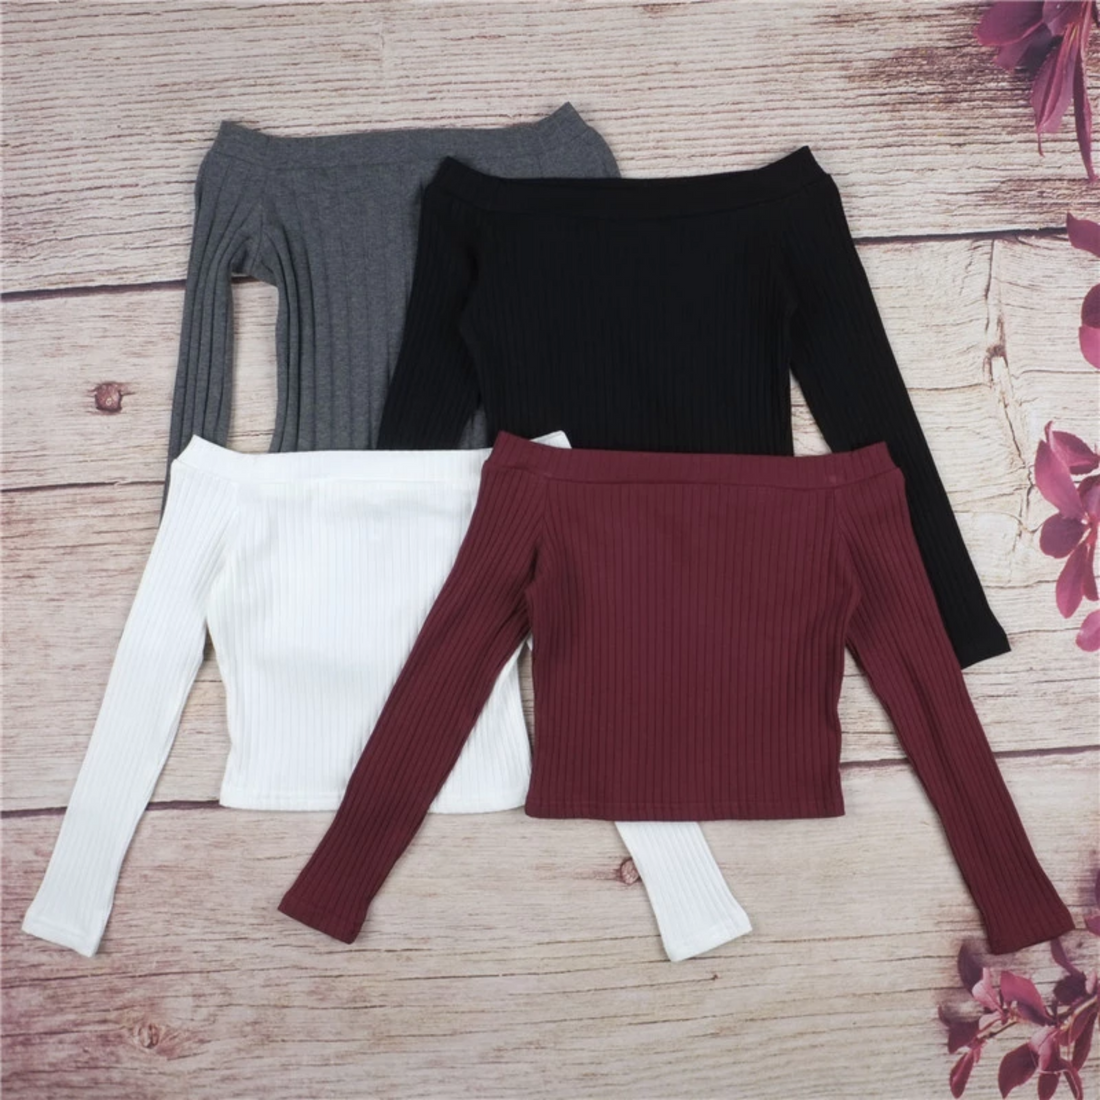 Women's Casual Knitted Off-Shoulder Long-Sleeved Crop Top